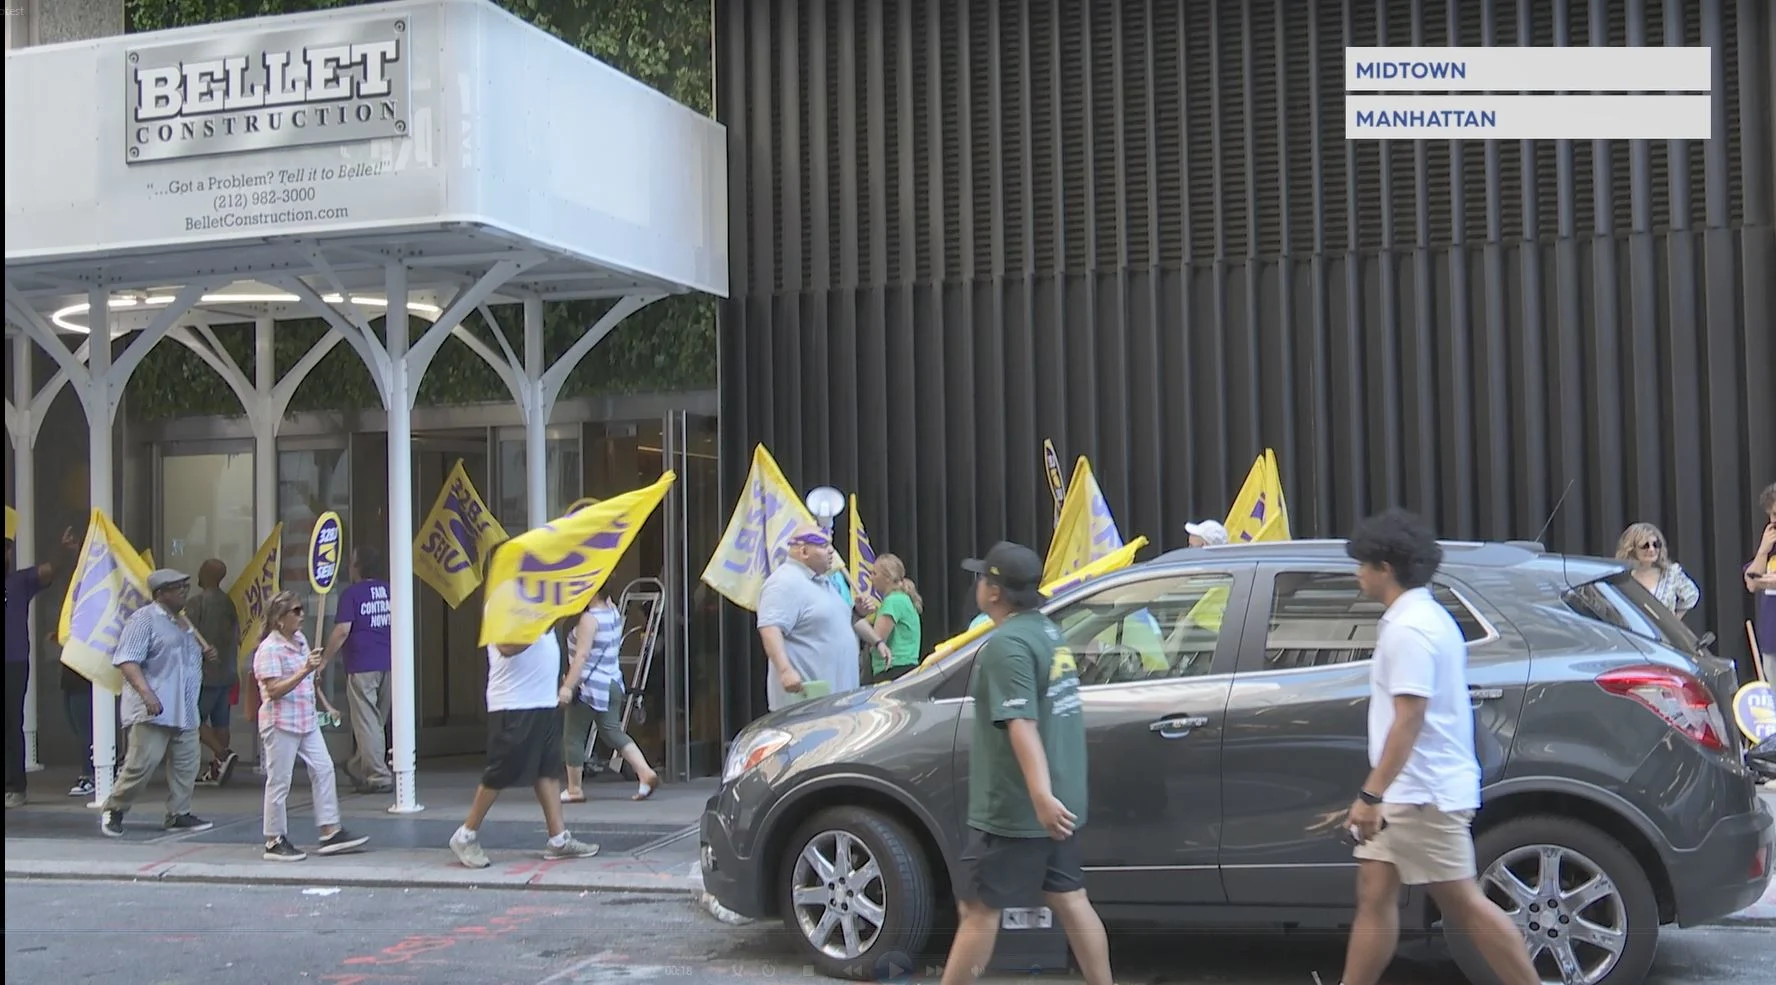 Midtown construction workers strike over collective bargaining rights